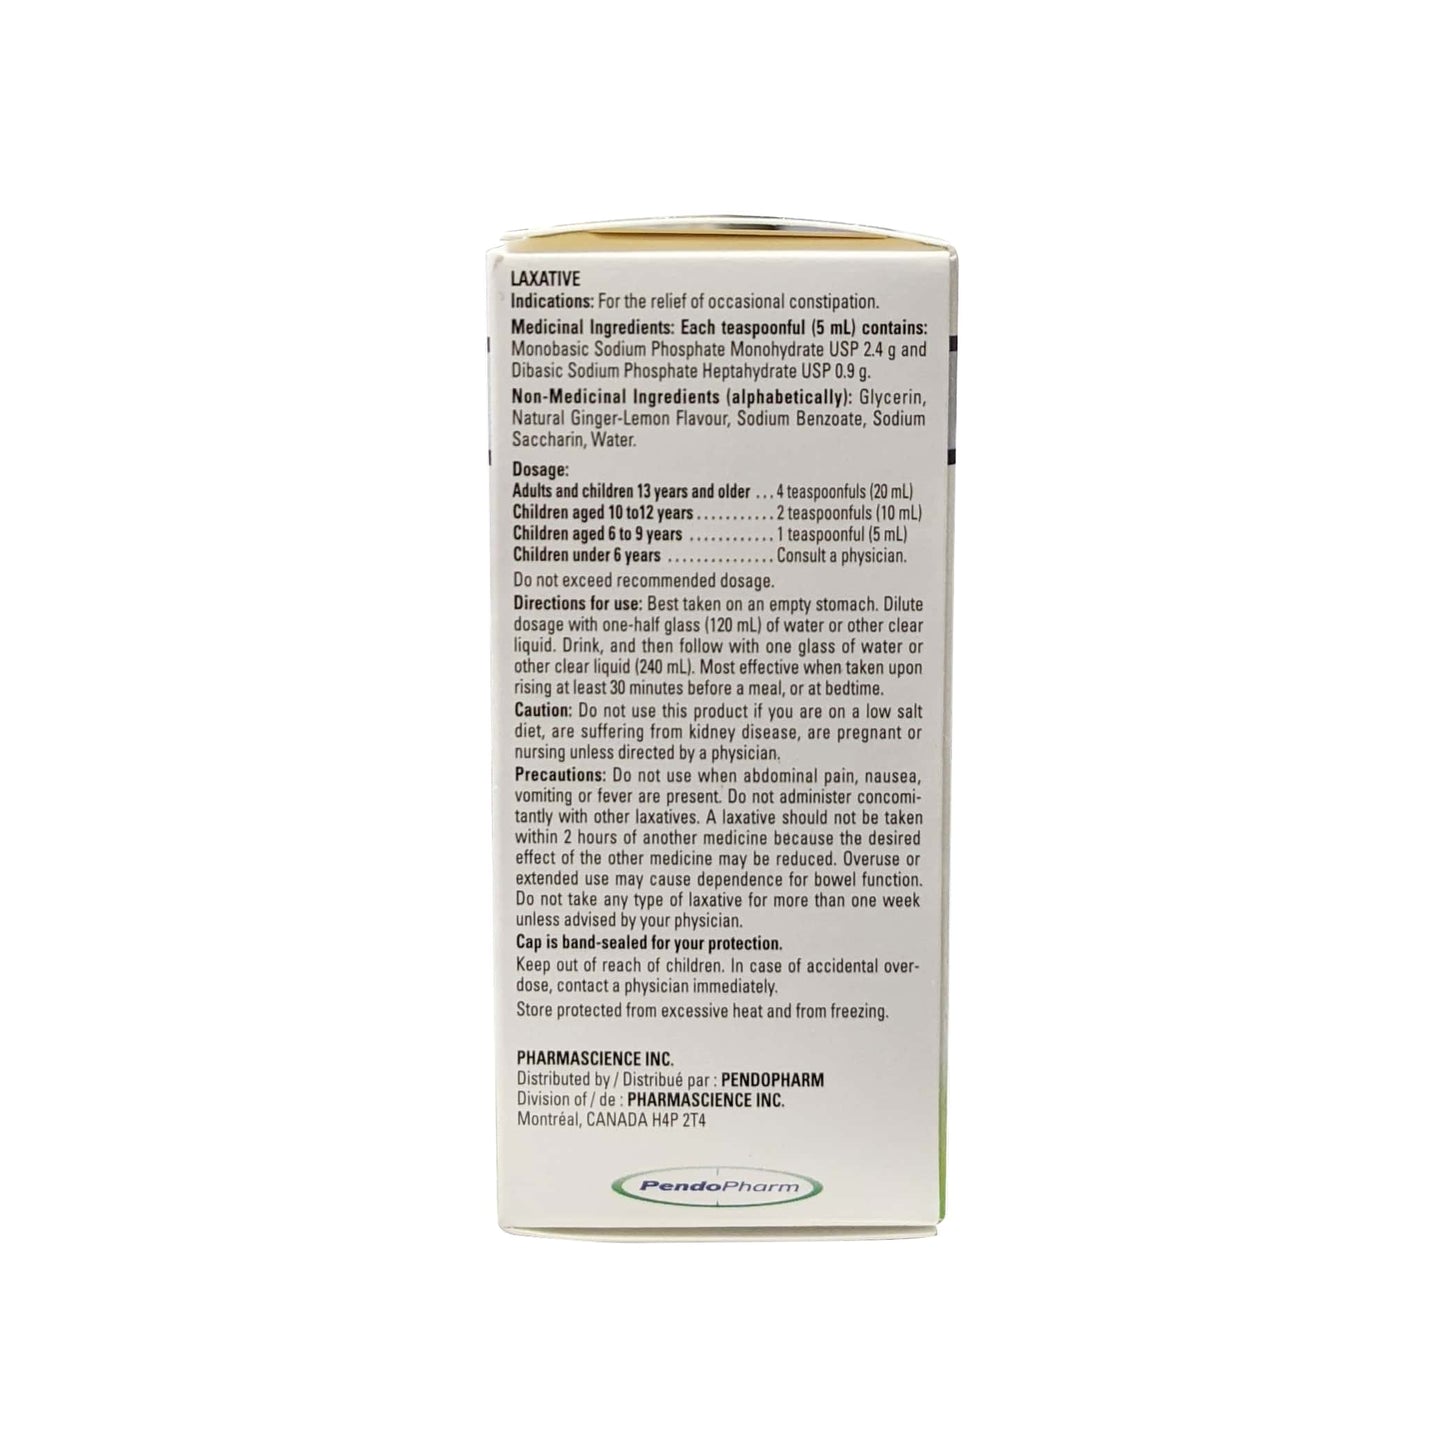 Indications, ingredients, dosage, directions, cautions for Pharma Science Phosphates Solution Laxative Ginger-Lemon Flavour (45 mL) in English